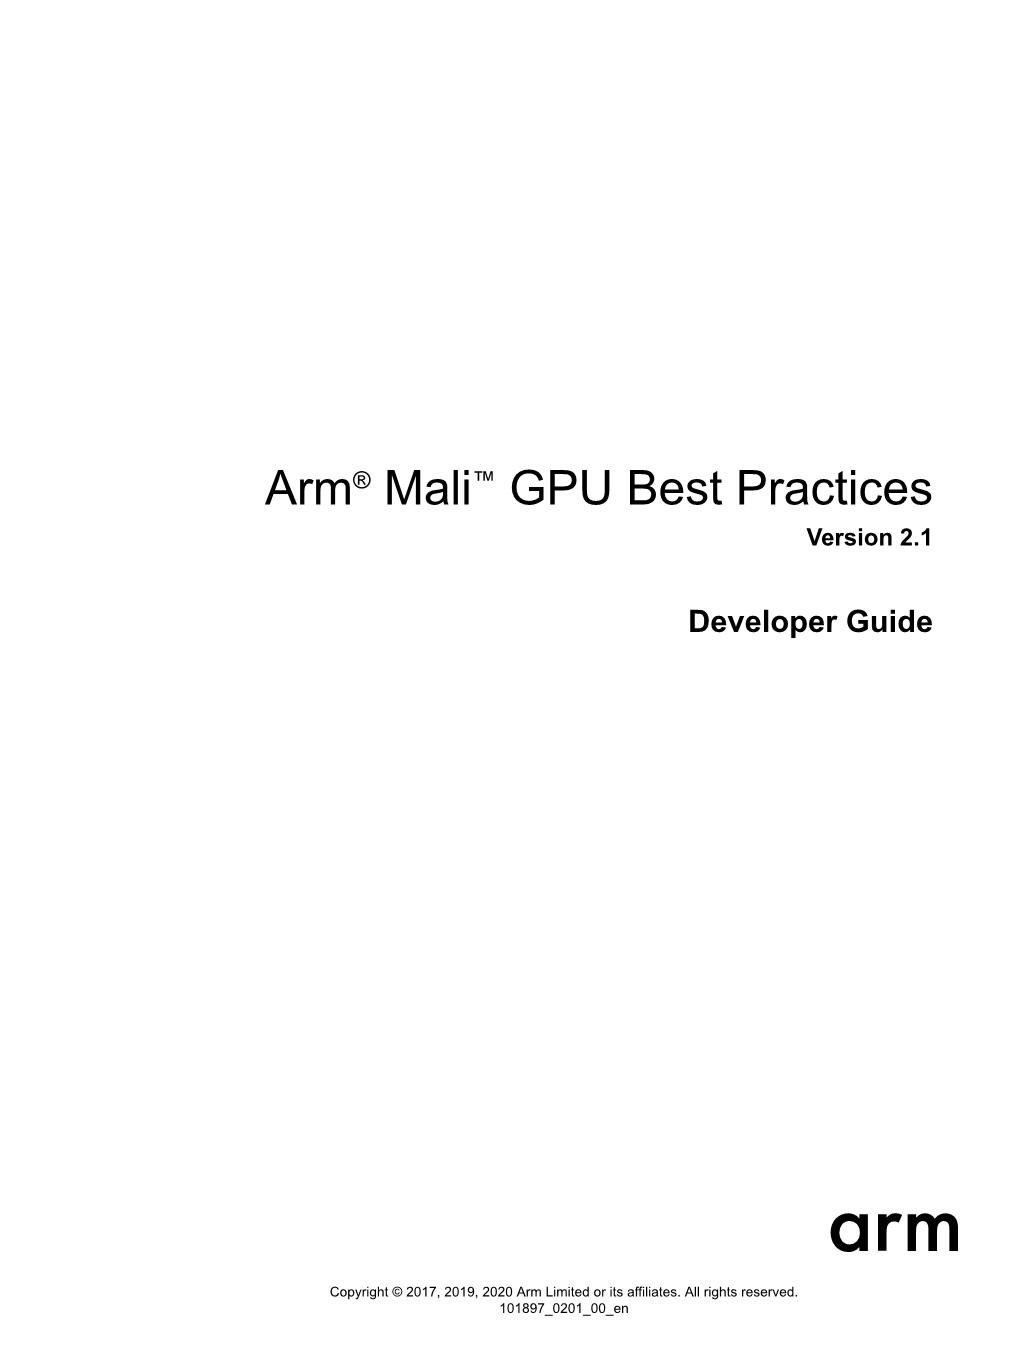 Arm® Mali™ GPU Best Practices Developer Guide Copyright © 2017, 2019, 2020 Arm Limited Or Its Affiliates